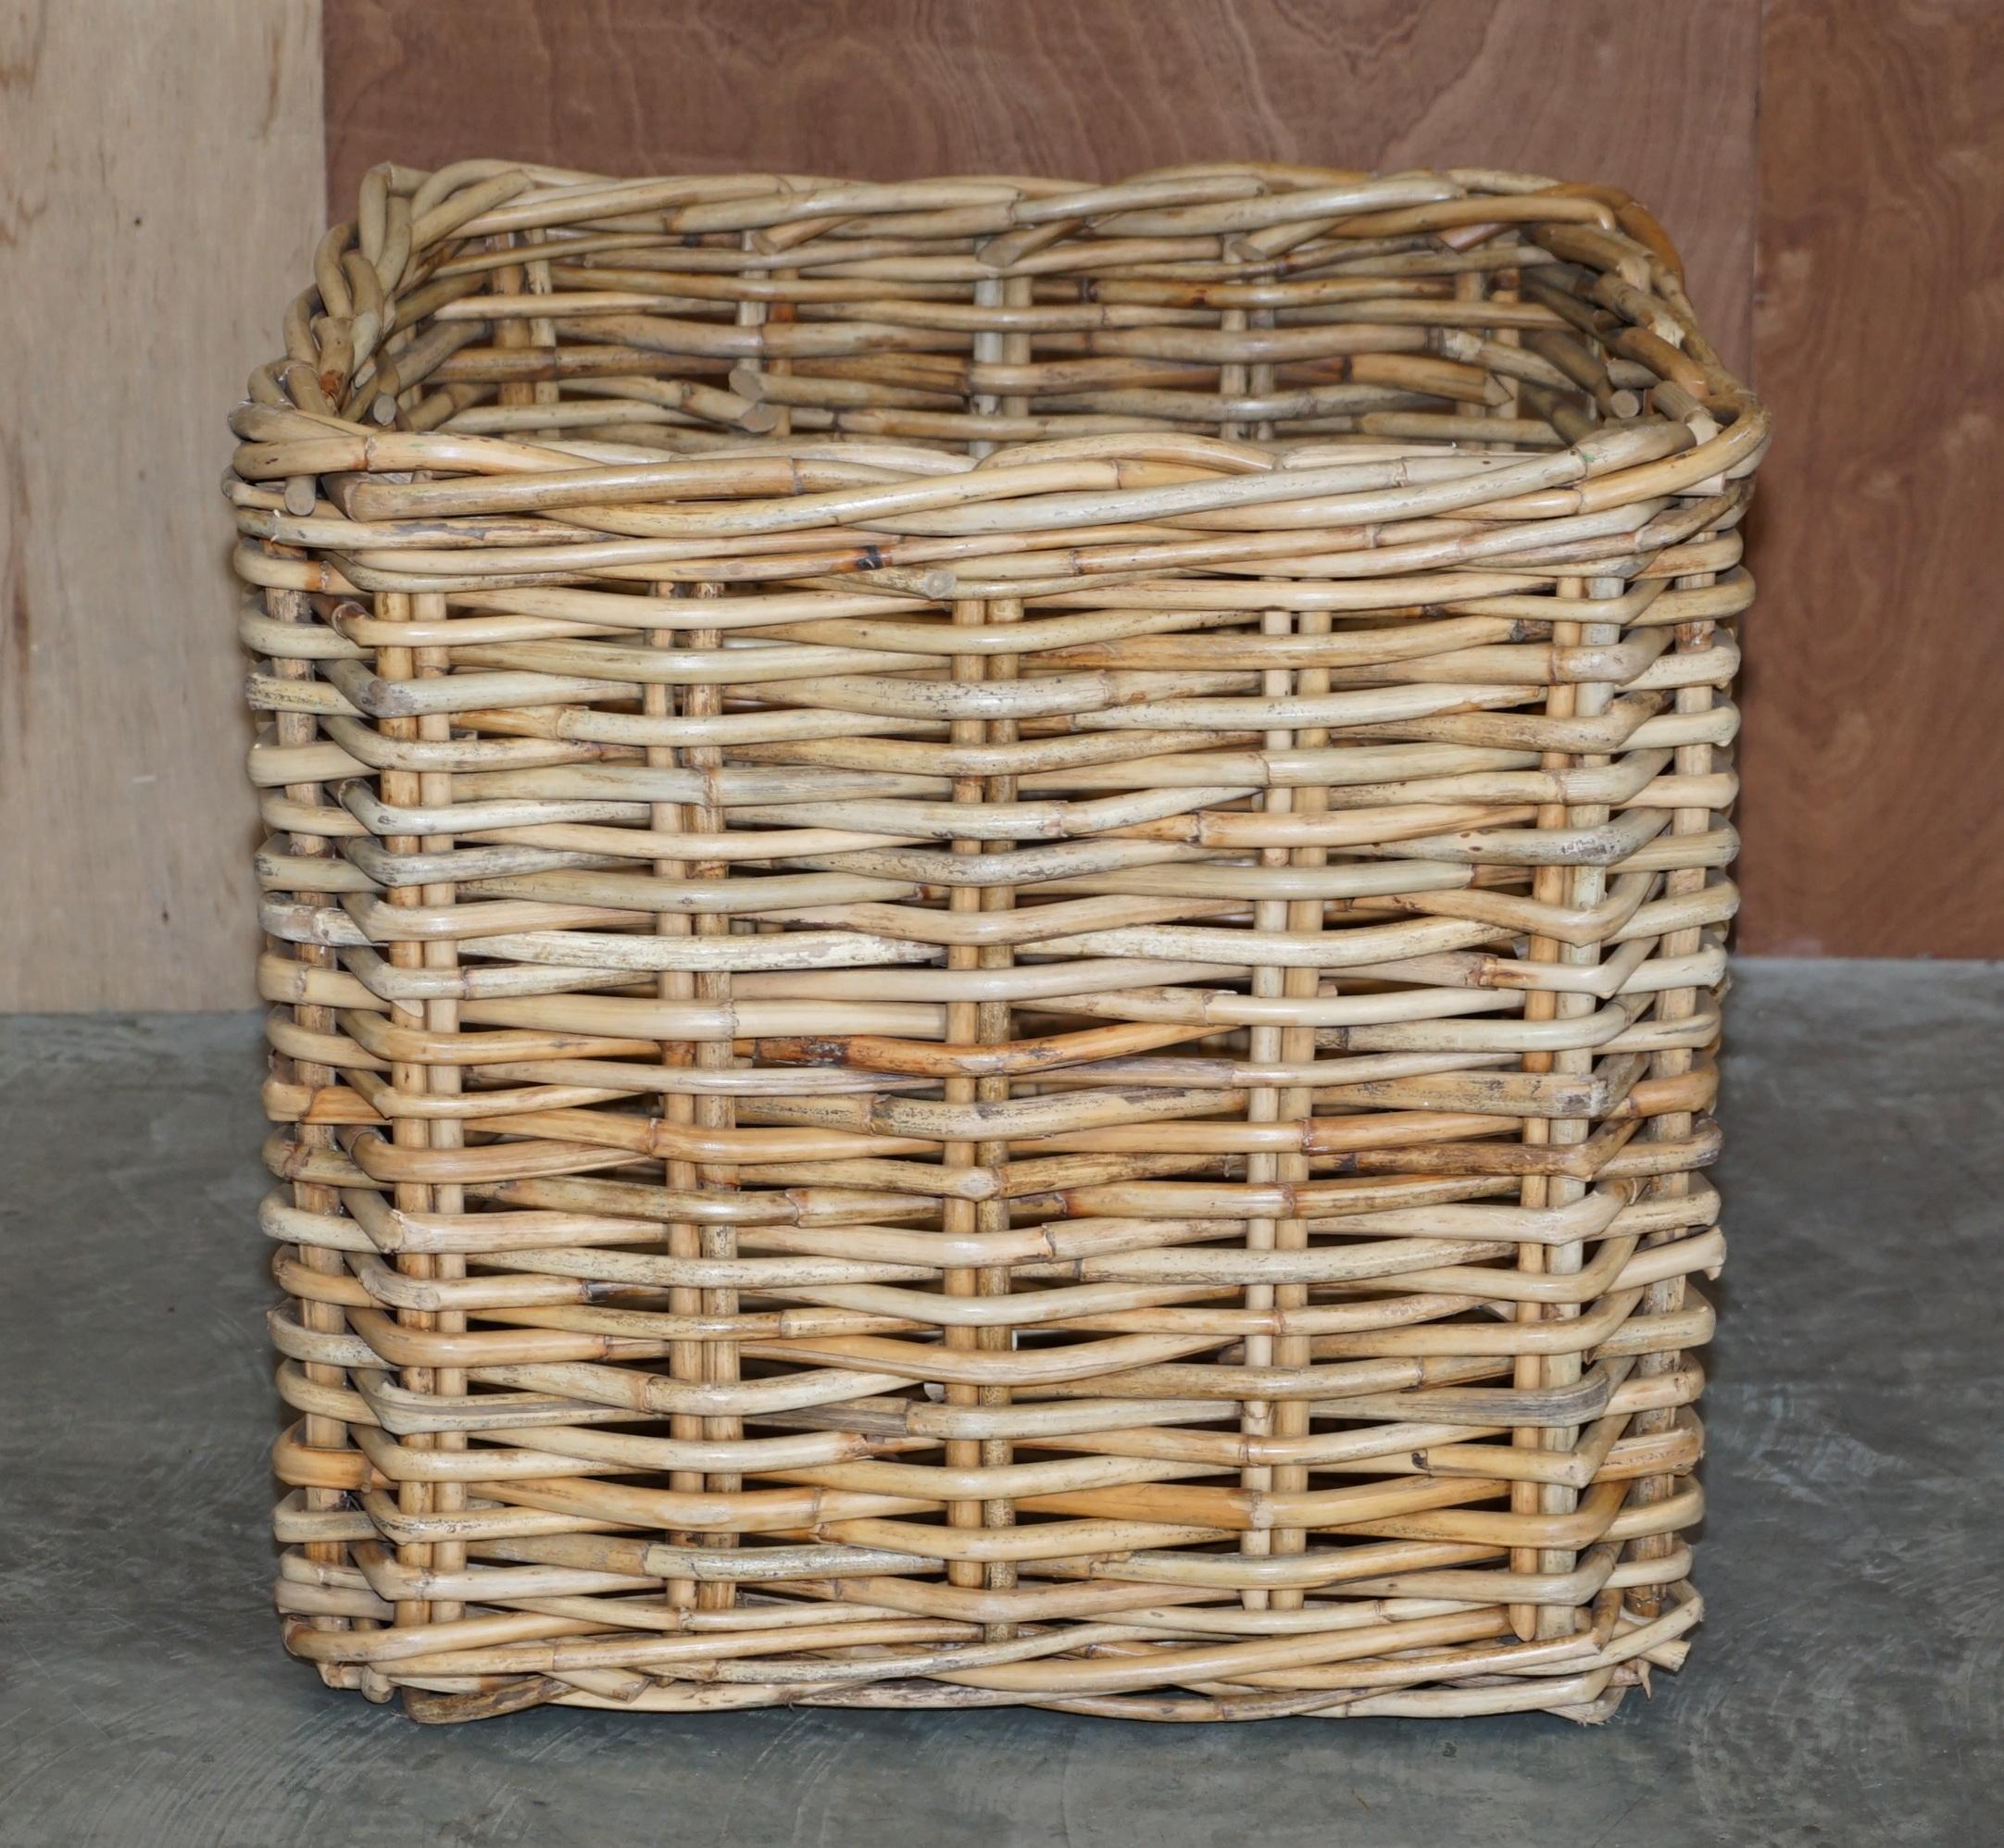 We are delighted to offer this very large vintage factory used fabric roll basket ideally suited as a log bin or laundry basket 

A very large example and factory used, this was made for holding large rolls of fabric in an upholstery firm, I’m not